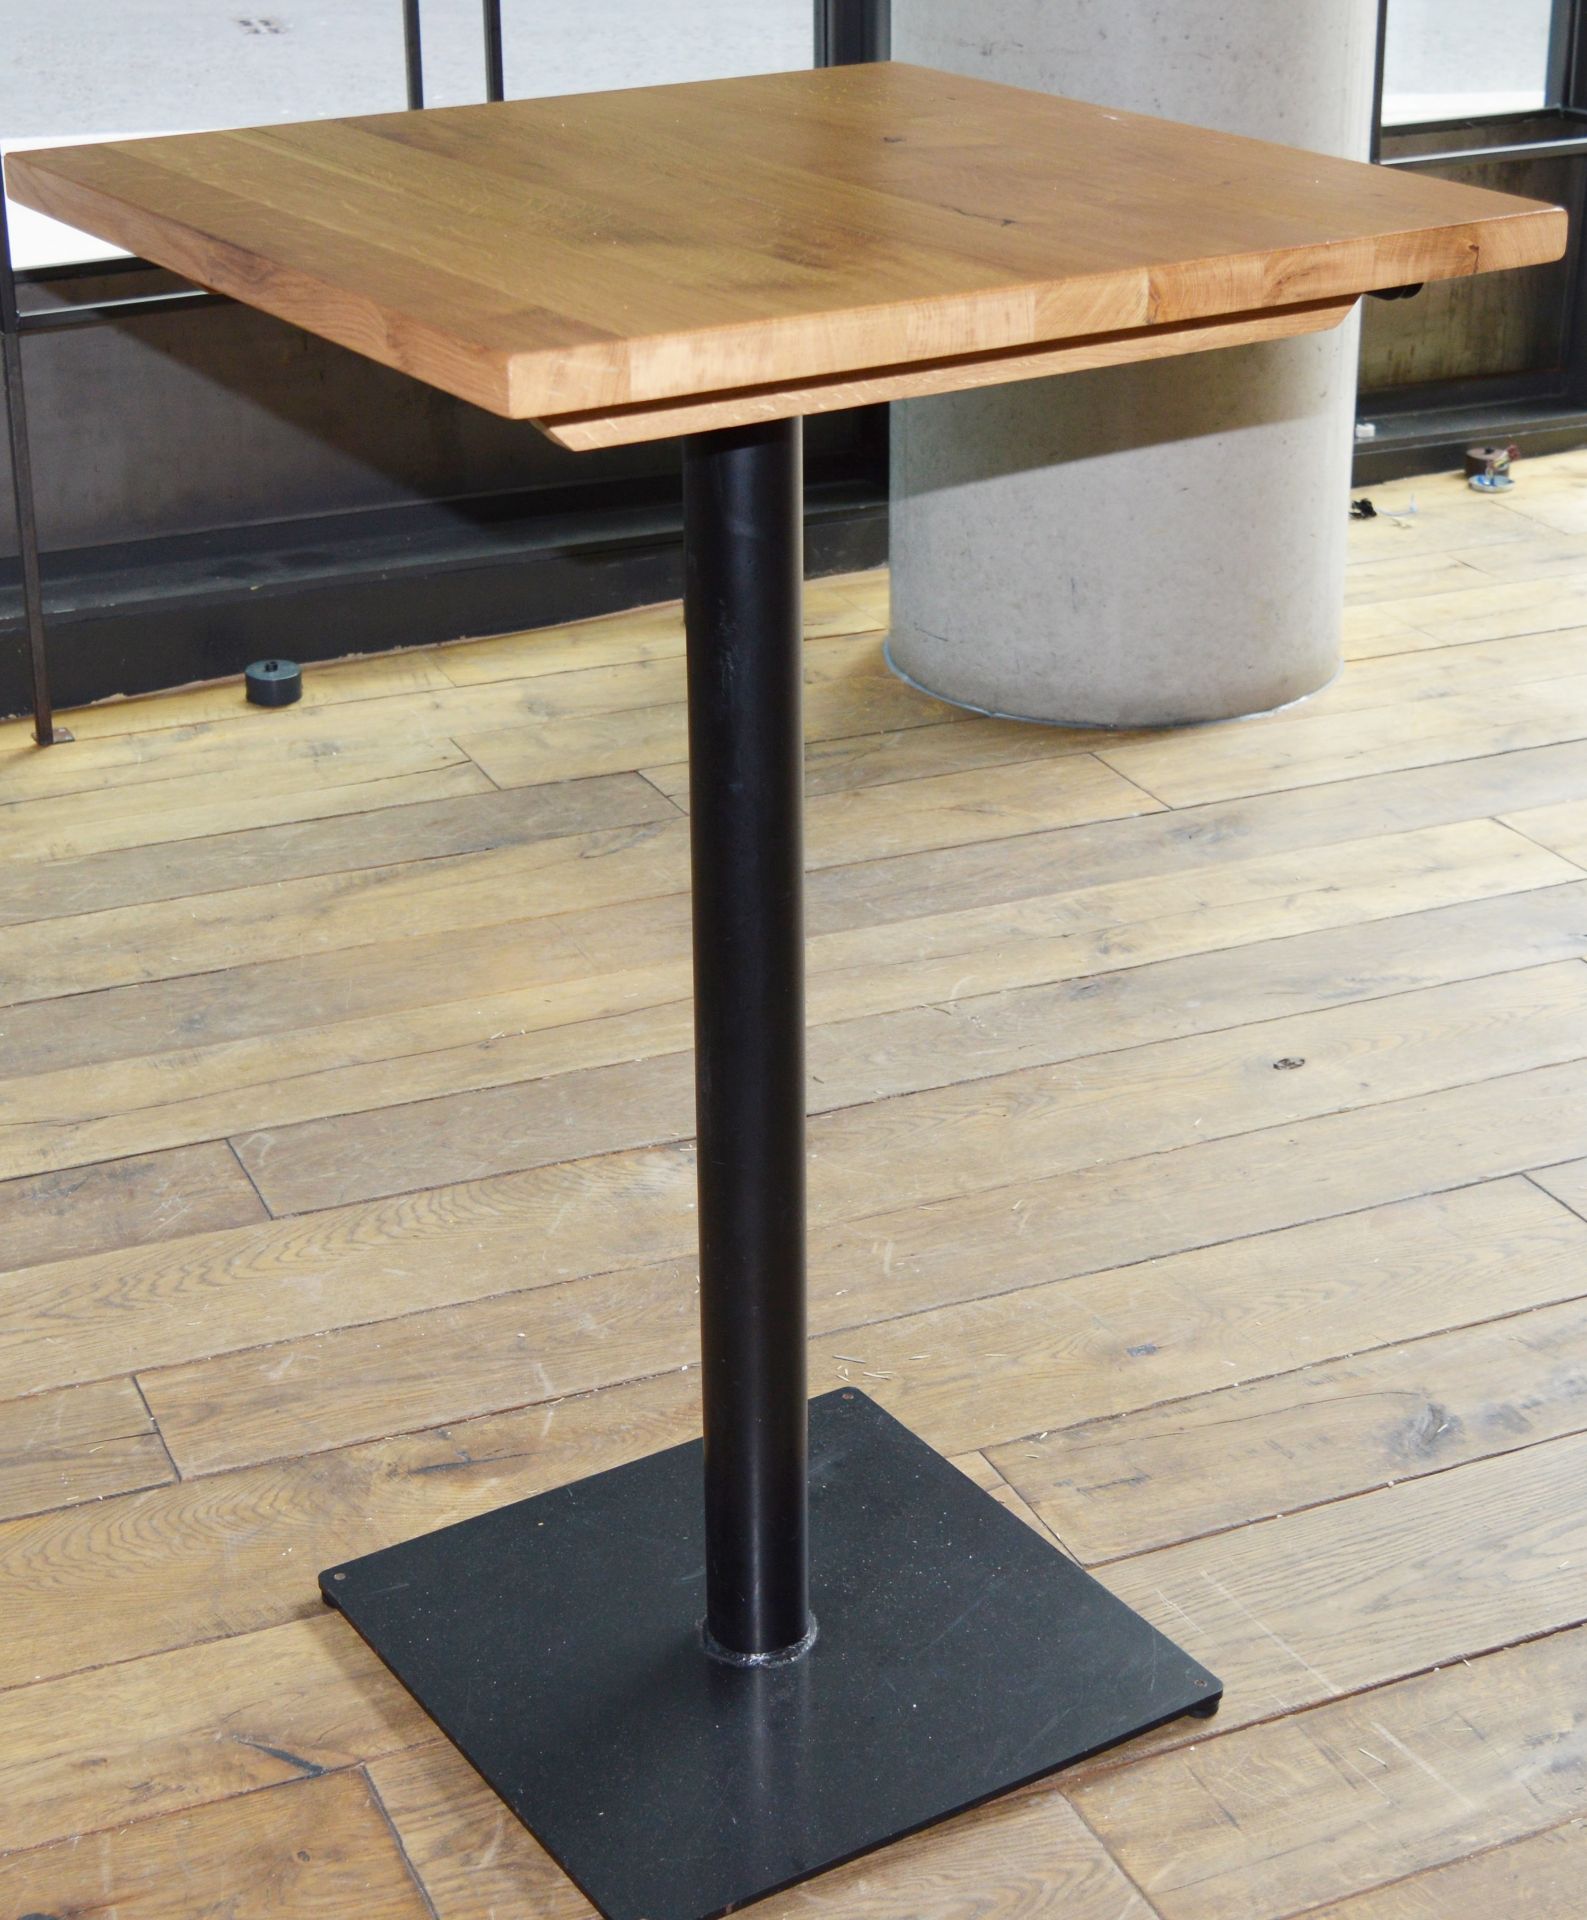 1 x Rustic Knotty Oak Poser Table - Suitable For Pubs & Restaurants - Substantial Base With Solid